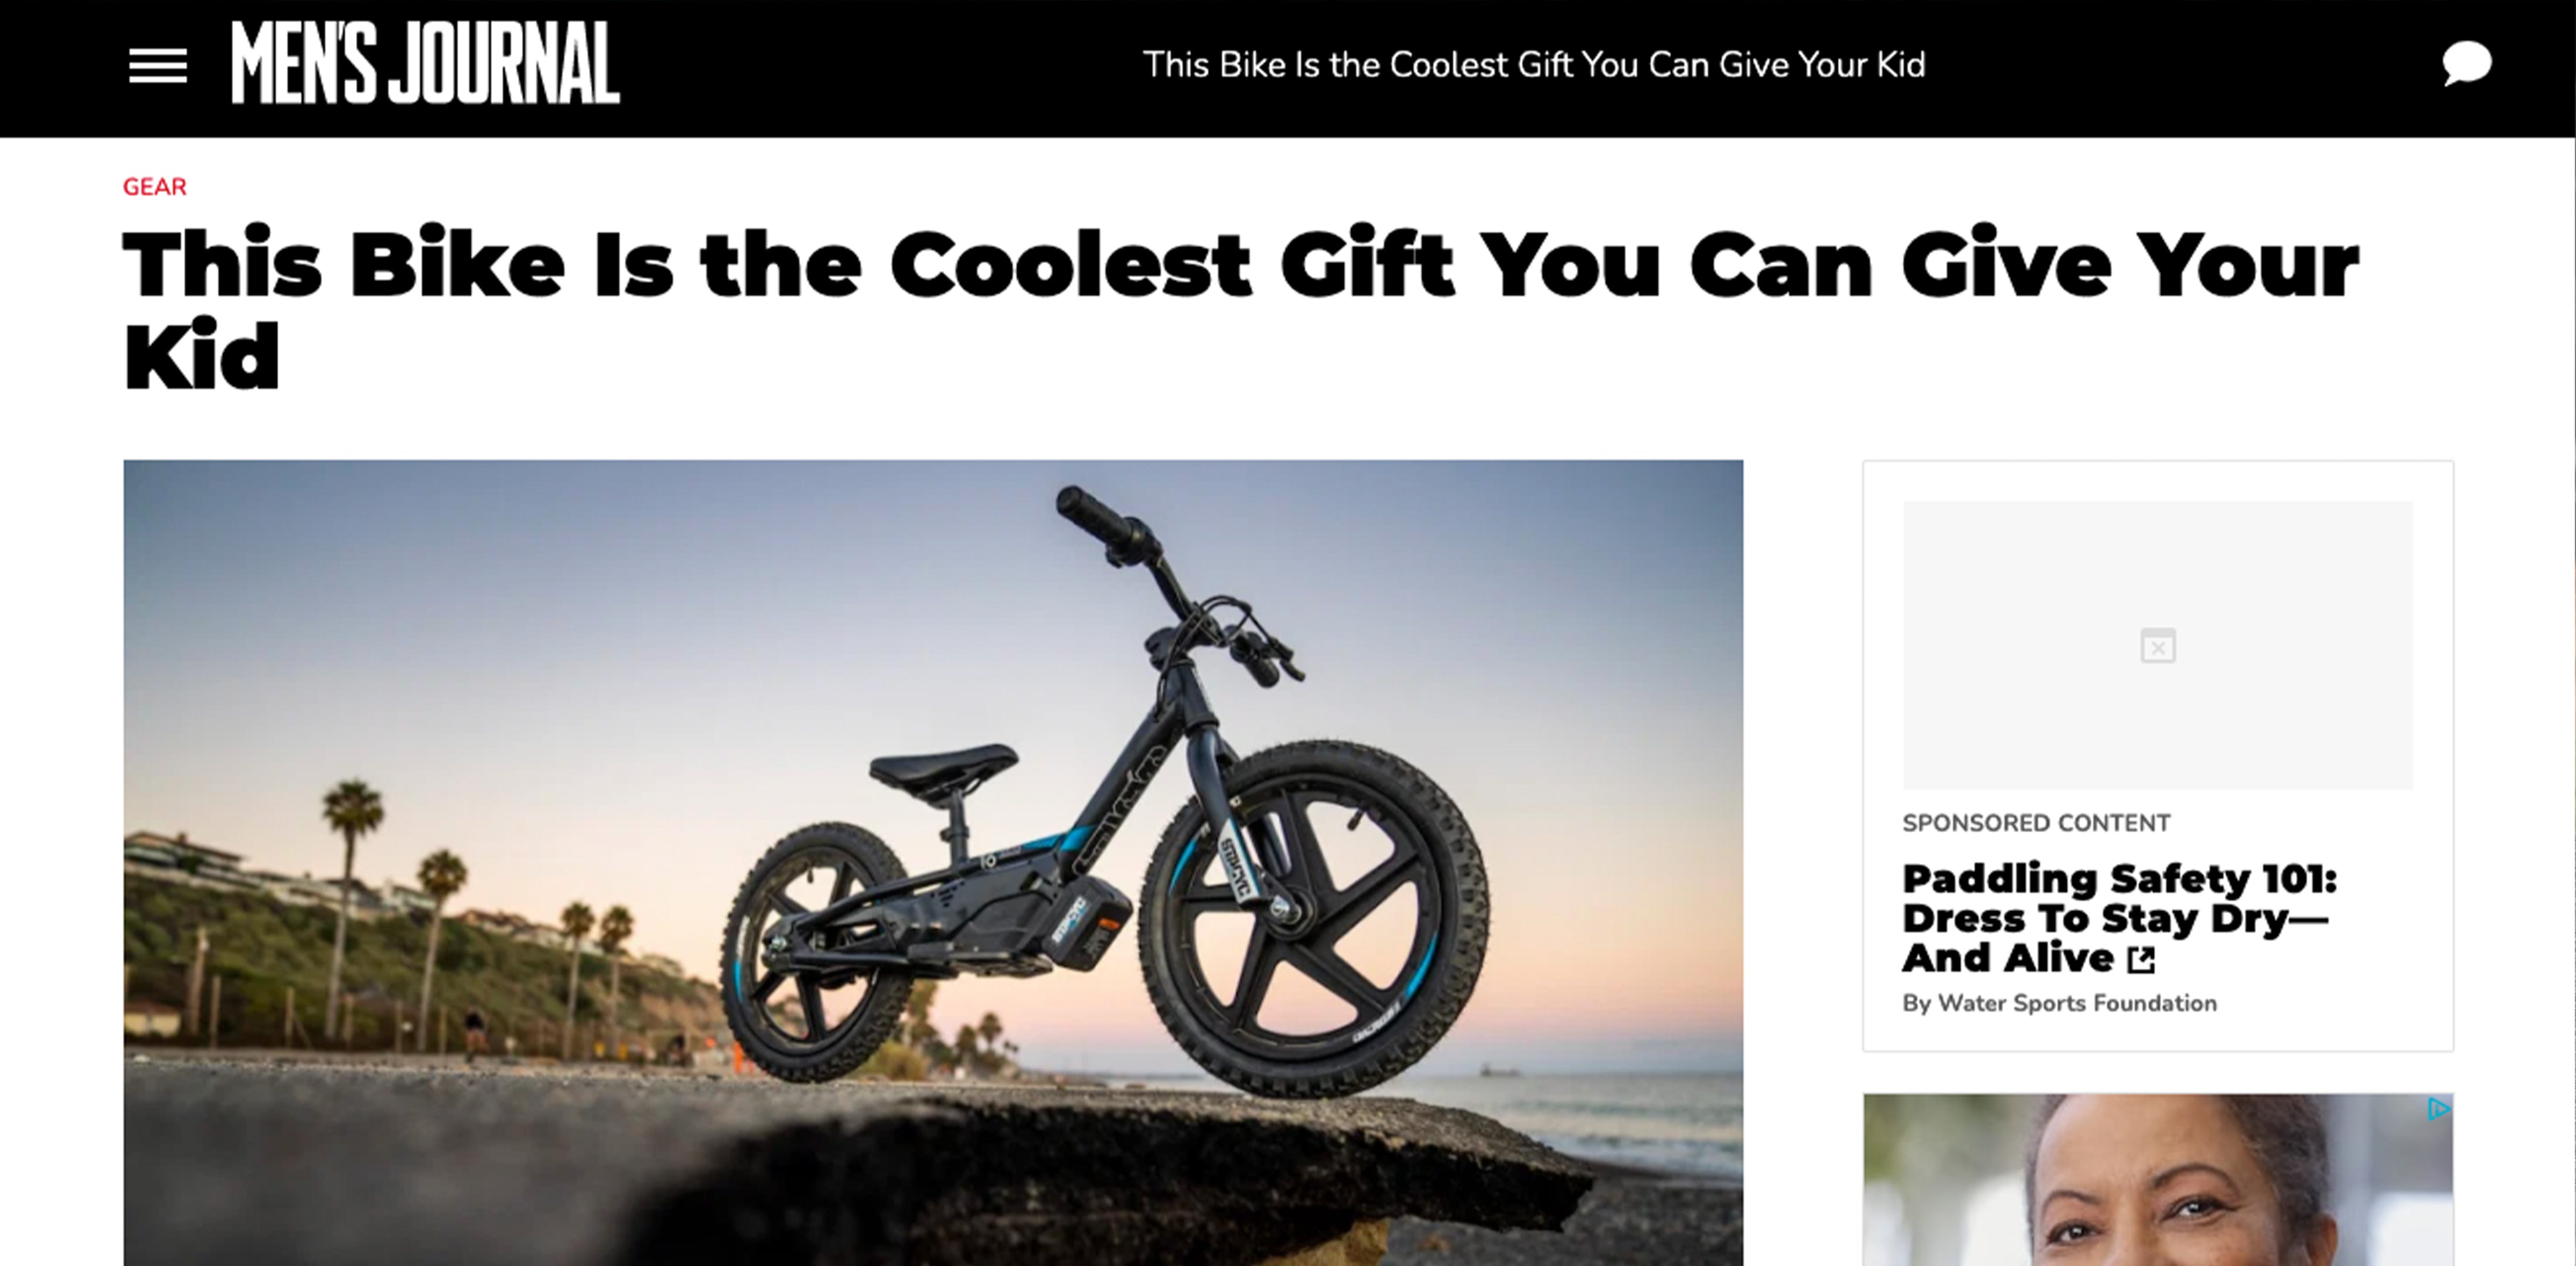 Men's Journal: This Bike Is the Coolest Gift You Can Give Your Kid